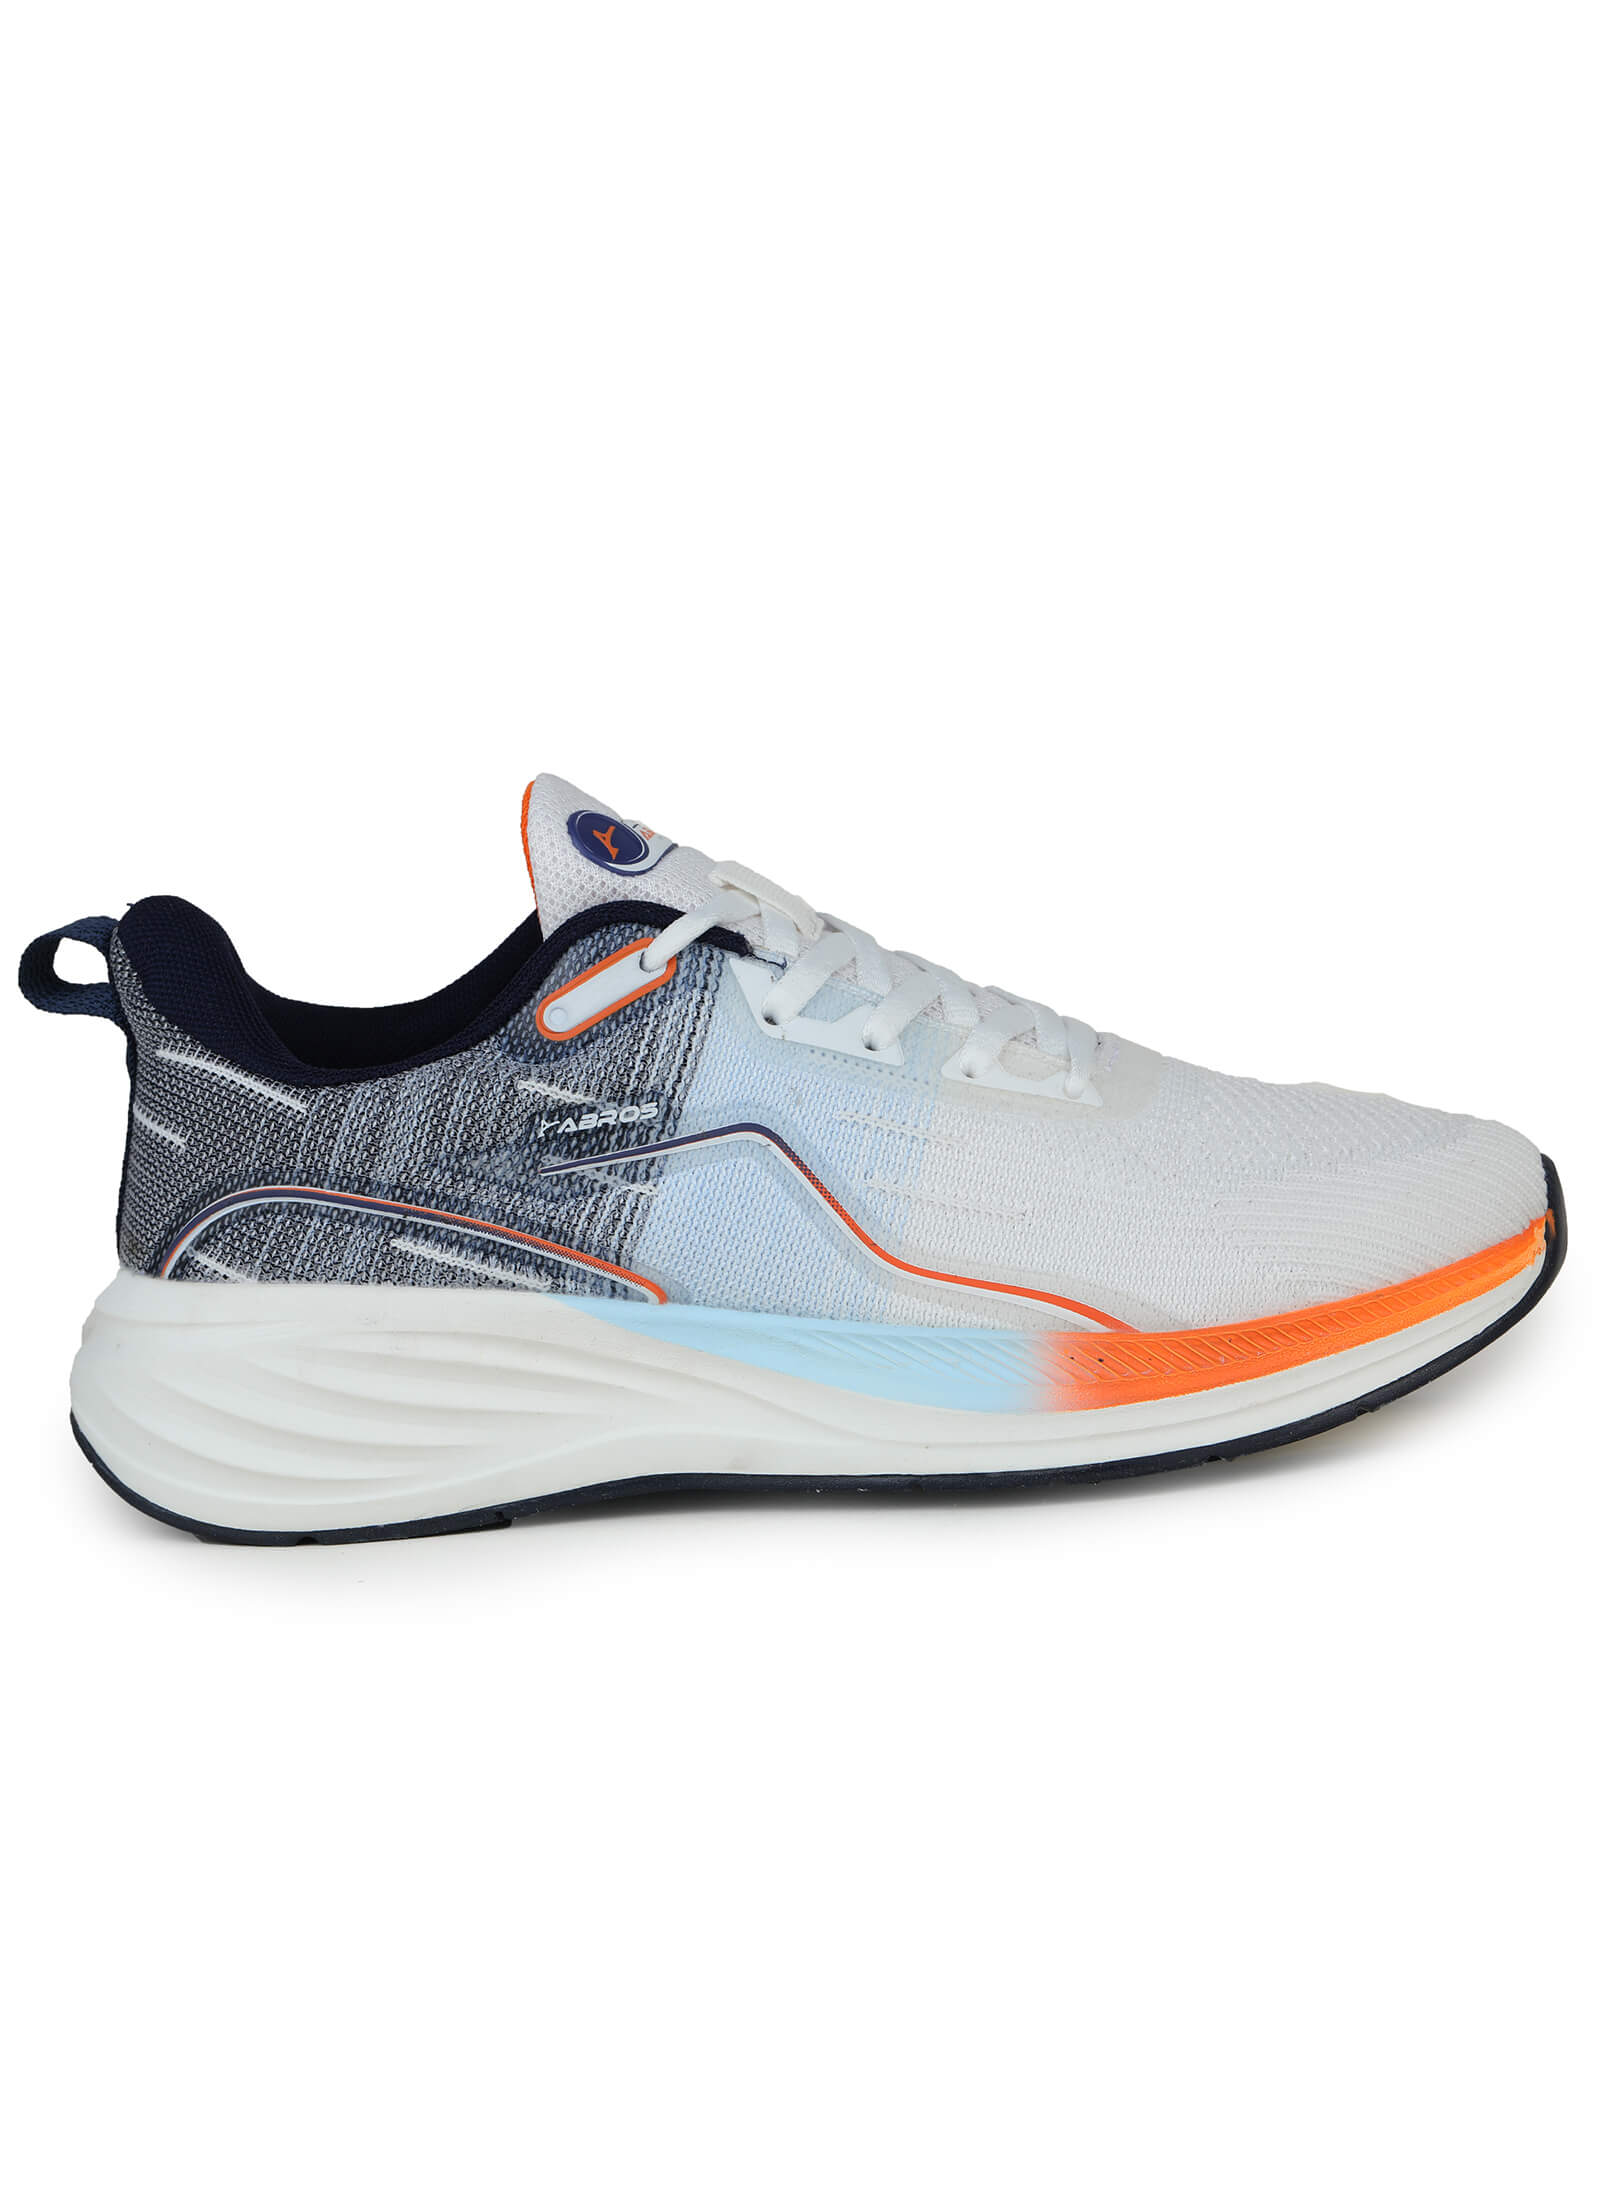 Fort Sports Shoes For Men